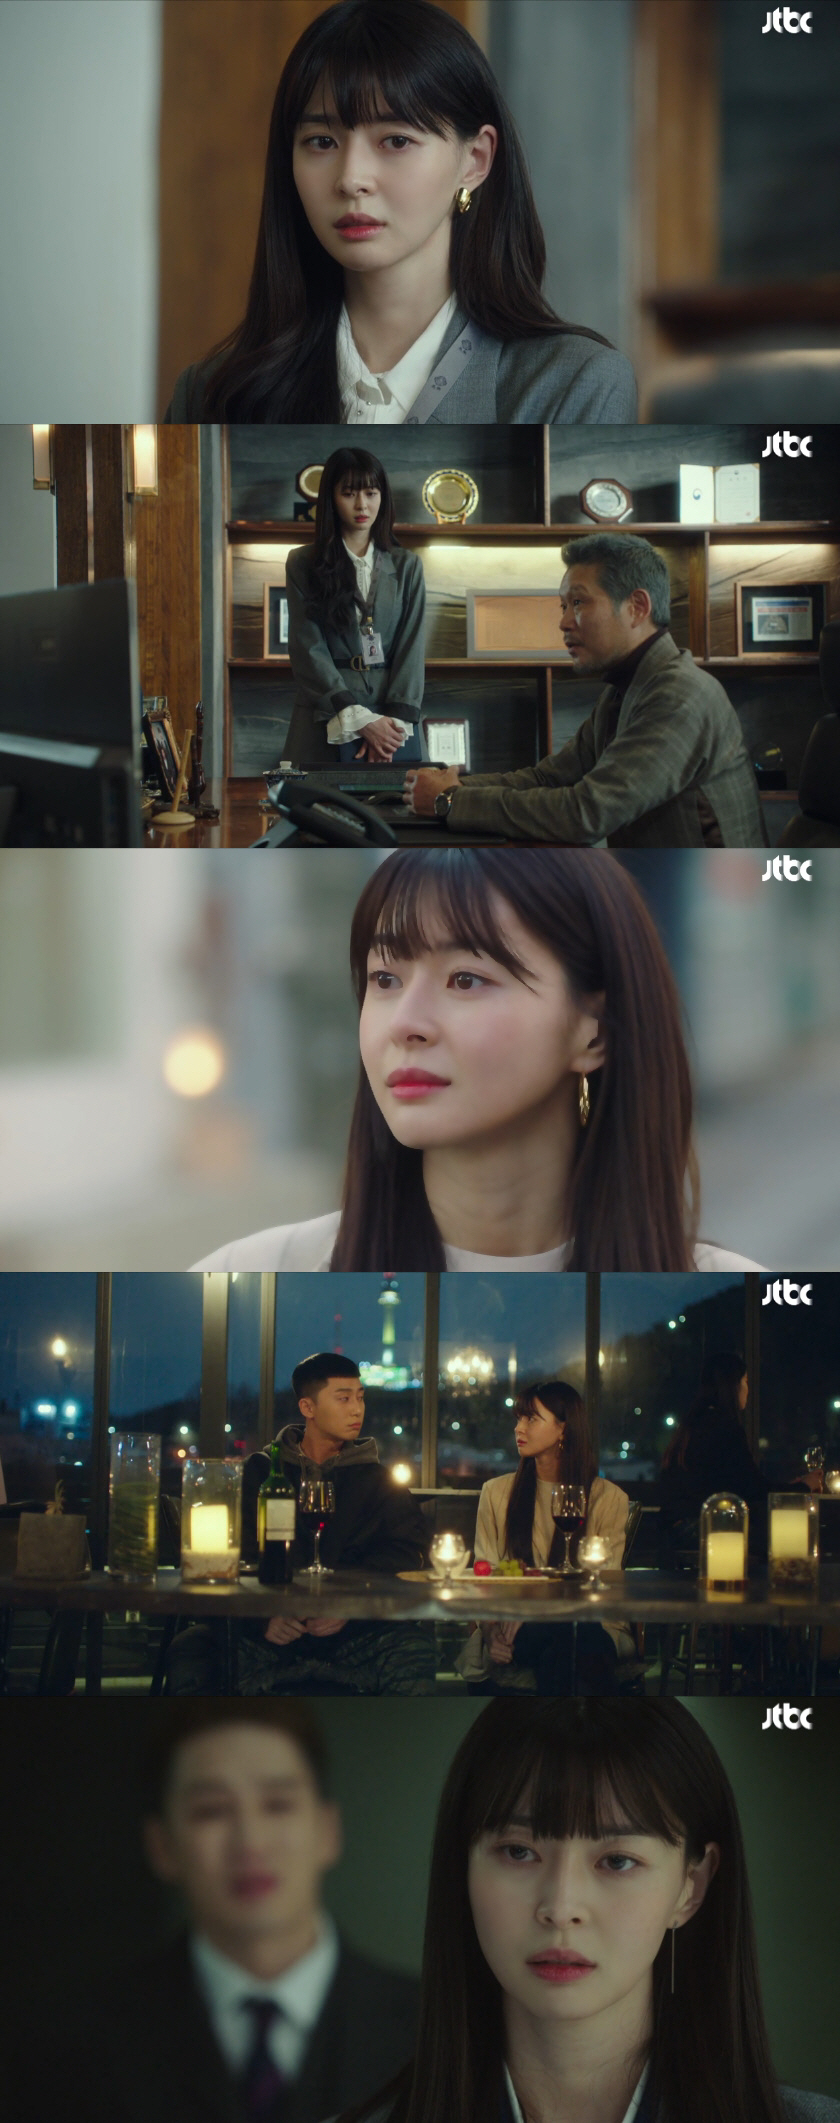 The aura and acting potentiary of Itaewon Klath Kwon Nara burst.Park Seo-joon, Yoo Jae-myung, and An-hyun, who caught the fate of the three men properly, she was a presence with the charm of a super-crash cider.In addition, Kwon Nara presented catharsis to the room with a clear temperature difference from sweet First Love to cold beauty who poured out anger and vitriolic.Kwon Nara showed off his presence in the 9th JTBC Itaewon Klath broadcast on the 28th, from the appearance of not being able to hide his excitement in the love contests of Park Seo-joon (Park Seo-joon), to the anger of Jangs Fountainhead (Anbo Hyun) with perfect hot acting of Oh Soo-ahs changing emotional lines.Oh Soo-ah took the hilt in earnest: Park, Chairman Jang Dae-hee (Yoo Jae-myung), and Chang, who took the initiative in their relationship with The Fountainhead.Oh Soo-ah found out that Chairman Chang followed director Kang Min-jung (Kim Hye-eun); it was Chairman Baro Chang who caught Oh Soo-ah trying to leave the chairmans office.He then revealed all his inner thoughts, from trying to scout Joy-Seo (played by Kim Dae-mi) to looking after Sanbam. Oh Soo-ah drew attention with a confused look.Of these, Oh Soo-ah met with Park Roy and received Confessions. Oh Soo-ah said, What would happen to us if I wasnt a janga person?, and Roy calmly Confessions, I like it, Baro said.Its always between us, he said, revealing that he was Oh Soo-ah hoping.Oh Soo-ah then smiled brightly and joked, I like the rich, and Park responded, I am a building owner, and gave me honey jam with the charm of sweet First Love romance.Kwon Nara raised the index of excitement in the room with a solid performance that completely melted Oh Soo-ahs psychology, which felt a complex feeling of clutter, surprise and relief in the Confessions of the Roy.Oh Soo-ahs thrilling cider moment, which was directed at The Fountainhead, which had killed Park Sung-yeol (Son Hyun-joo), completely fascinated the house theater.Oh Soo-ah was angry at The Fountainhead, who hovered around him and craved affection, saying, What confidence are you doing?Oh Soo-ah told The Fountainhead, who excused the past as an accident, After that? After the accident.I did not report it, I was overthrown by someone else, was it an accident? I really hate you. Oh Soo-ah said he liked Roy, not him, and once again added Do not flinch to the heart of the Fountainhead, adding strength to the girl crush cider.Kwon Naras upturned performance, which explodes the aura of cold beauty with uncompromising vitriolic and creepy eyes, vertically increased immersion and made viewers hearts chewy.Kwon Naras brilliant performance, which is drawing the charm of Oh Soo-ah every time, is making a lot of fun to see the drama Itaewon Clath with a hot reception.In addition, as a key figure who has won the heart of the characters who are sharply confronted, he has done more than his share and raised expectations for his performance.Meanwhile, Itaewon Klath, starring Kwon Nara, will air today at 10:50 p.m. on JTBC.